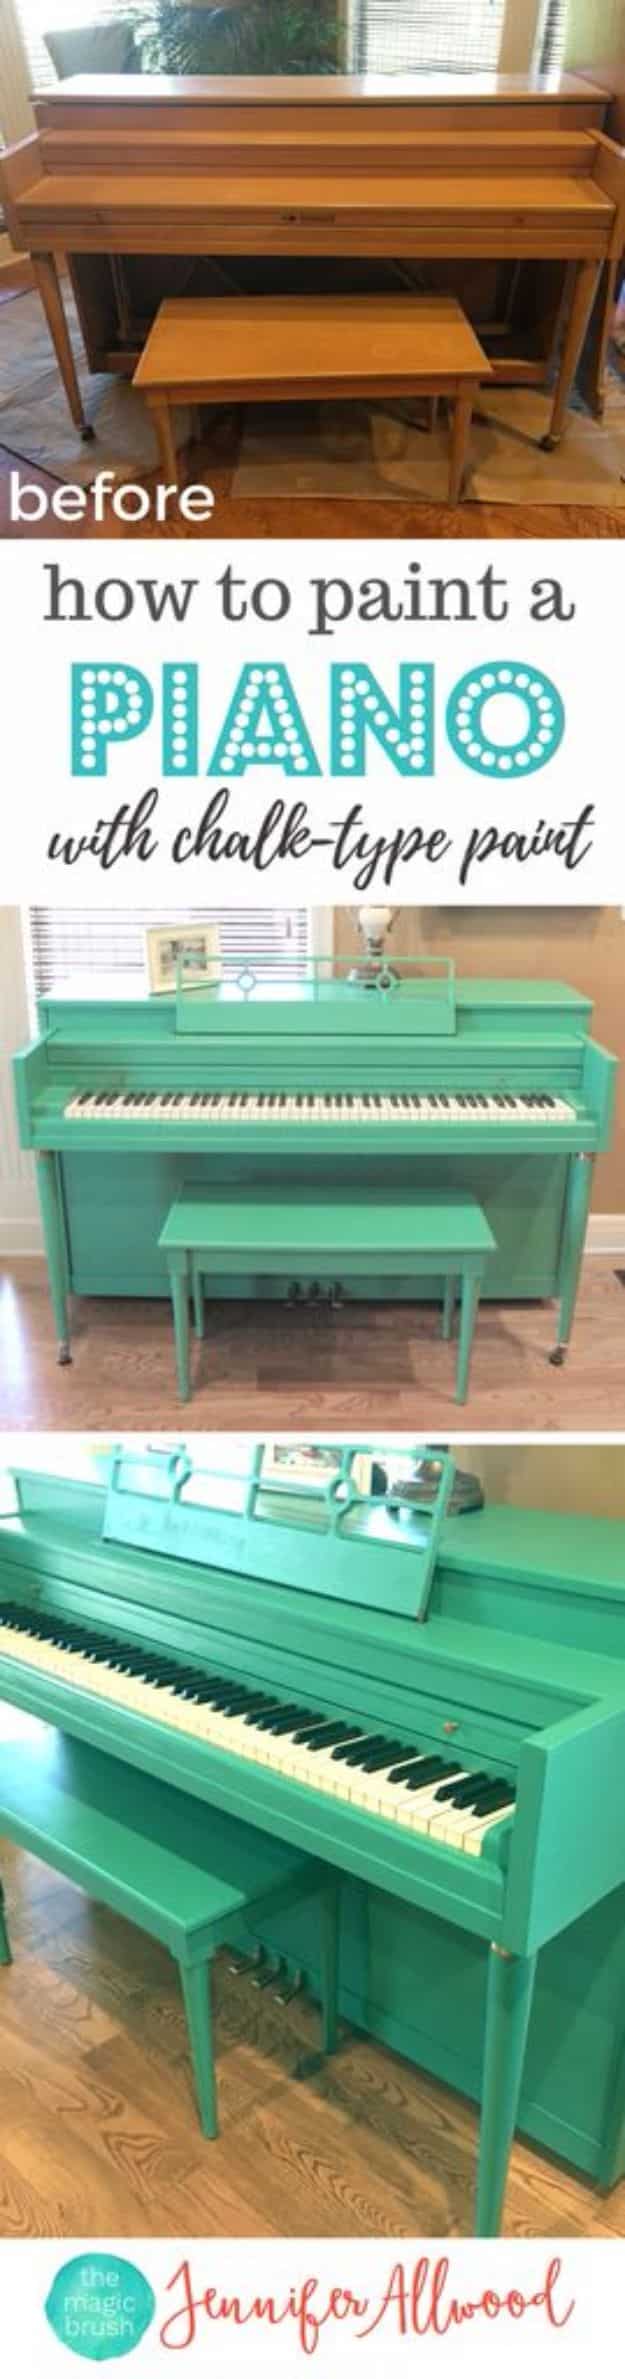 DIY Painting Hacks - Paint An Old Piano - Easy Ways To Shortcut House Painting - Wall Prep, Painters Tape, Trim, Edging, Ceiling, Exterior Cutting In, Furniture and Crafts Paint Tips - Paint Your House Or Your Room With These Time Saving Painter Hacks and Quick Tricks http://diyjoy.com/diy-painting-hacks